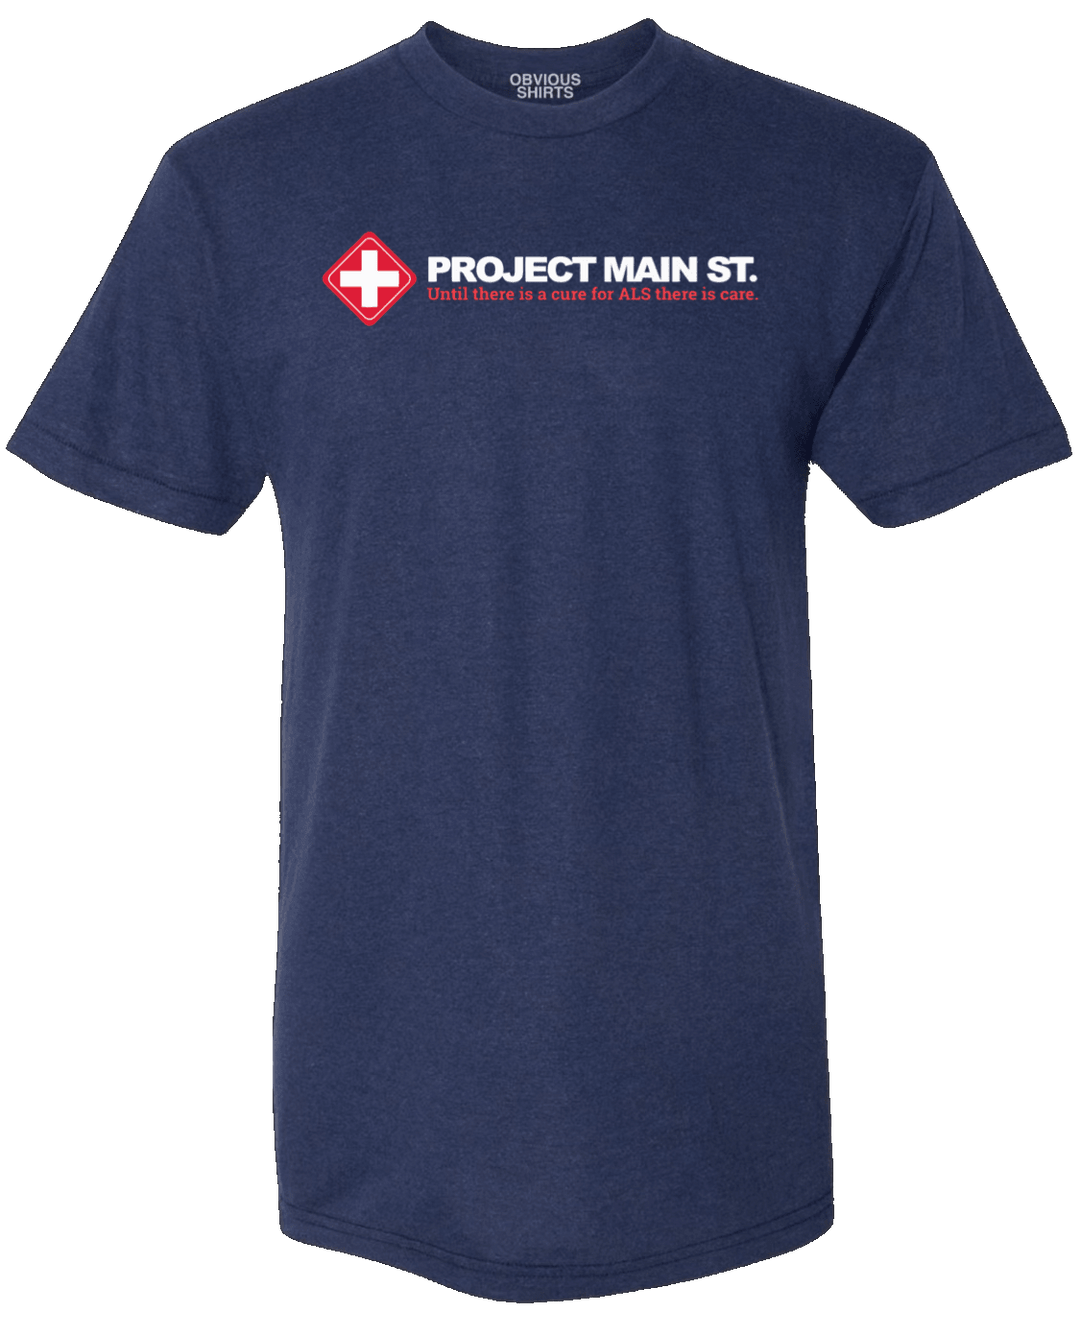 PROJECT MAIN STREET LOGO TEE - OBVIOUS SHIRTS.